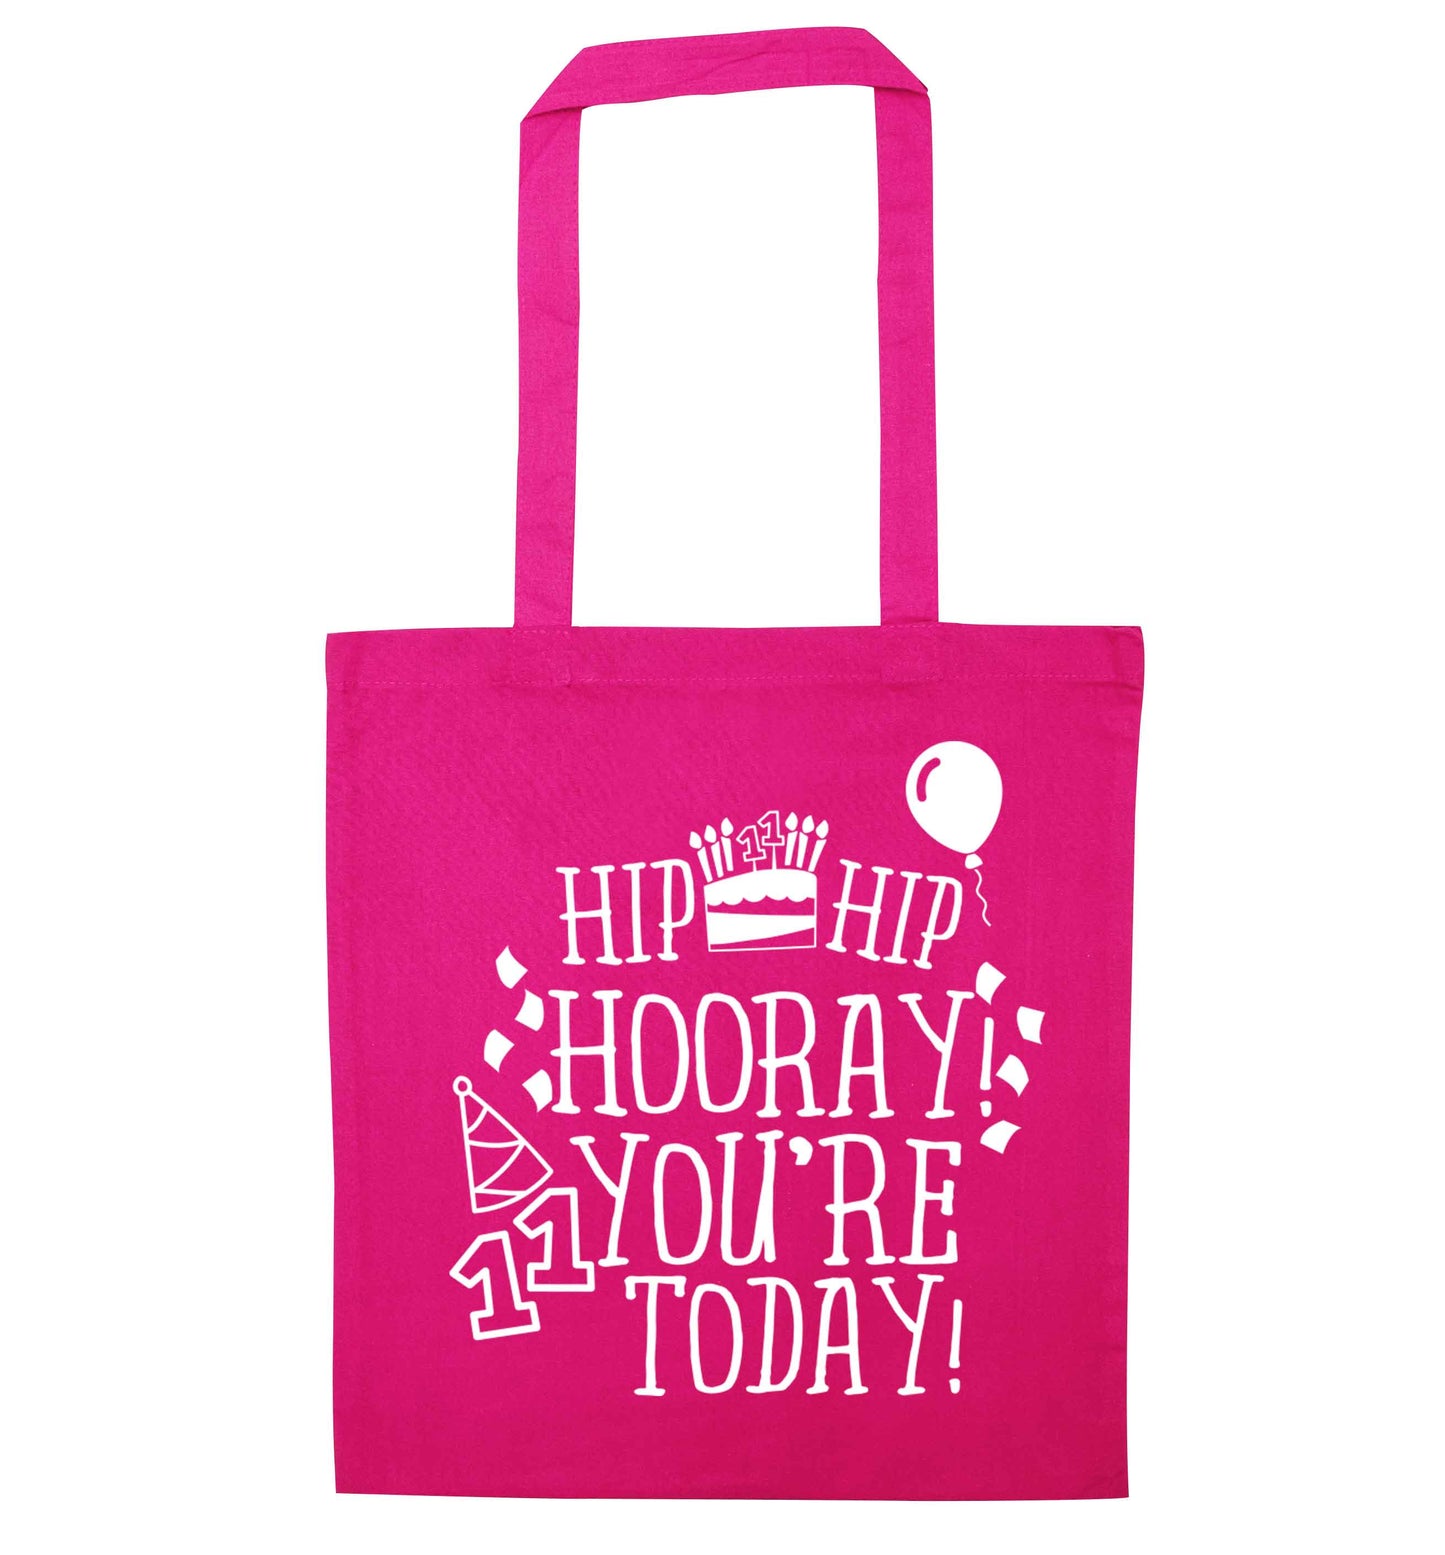 Hip hip hooray I you're eleven today! pink tote bag